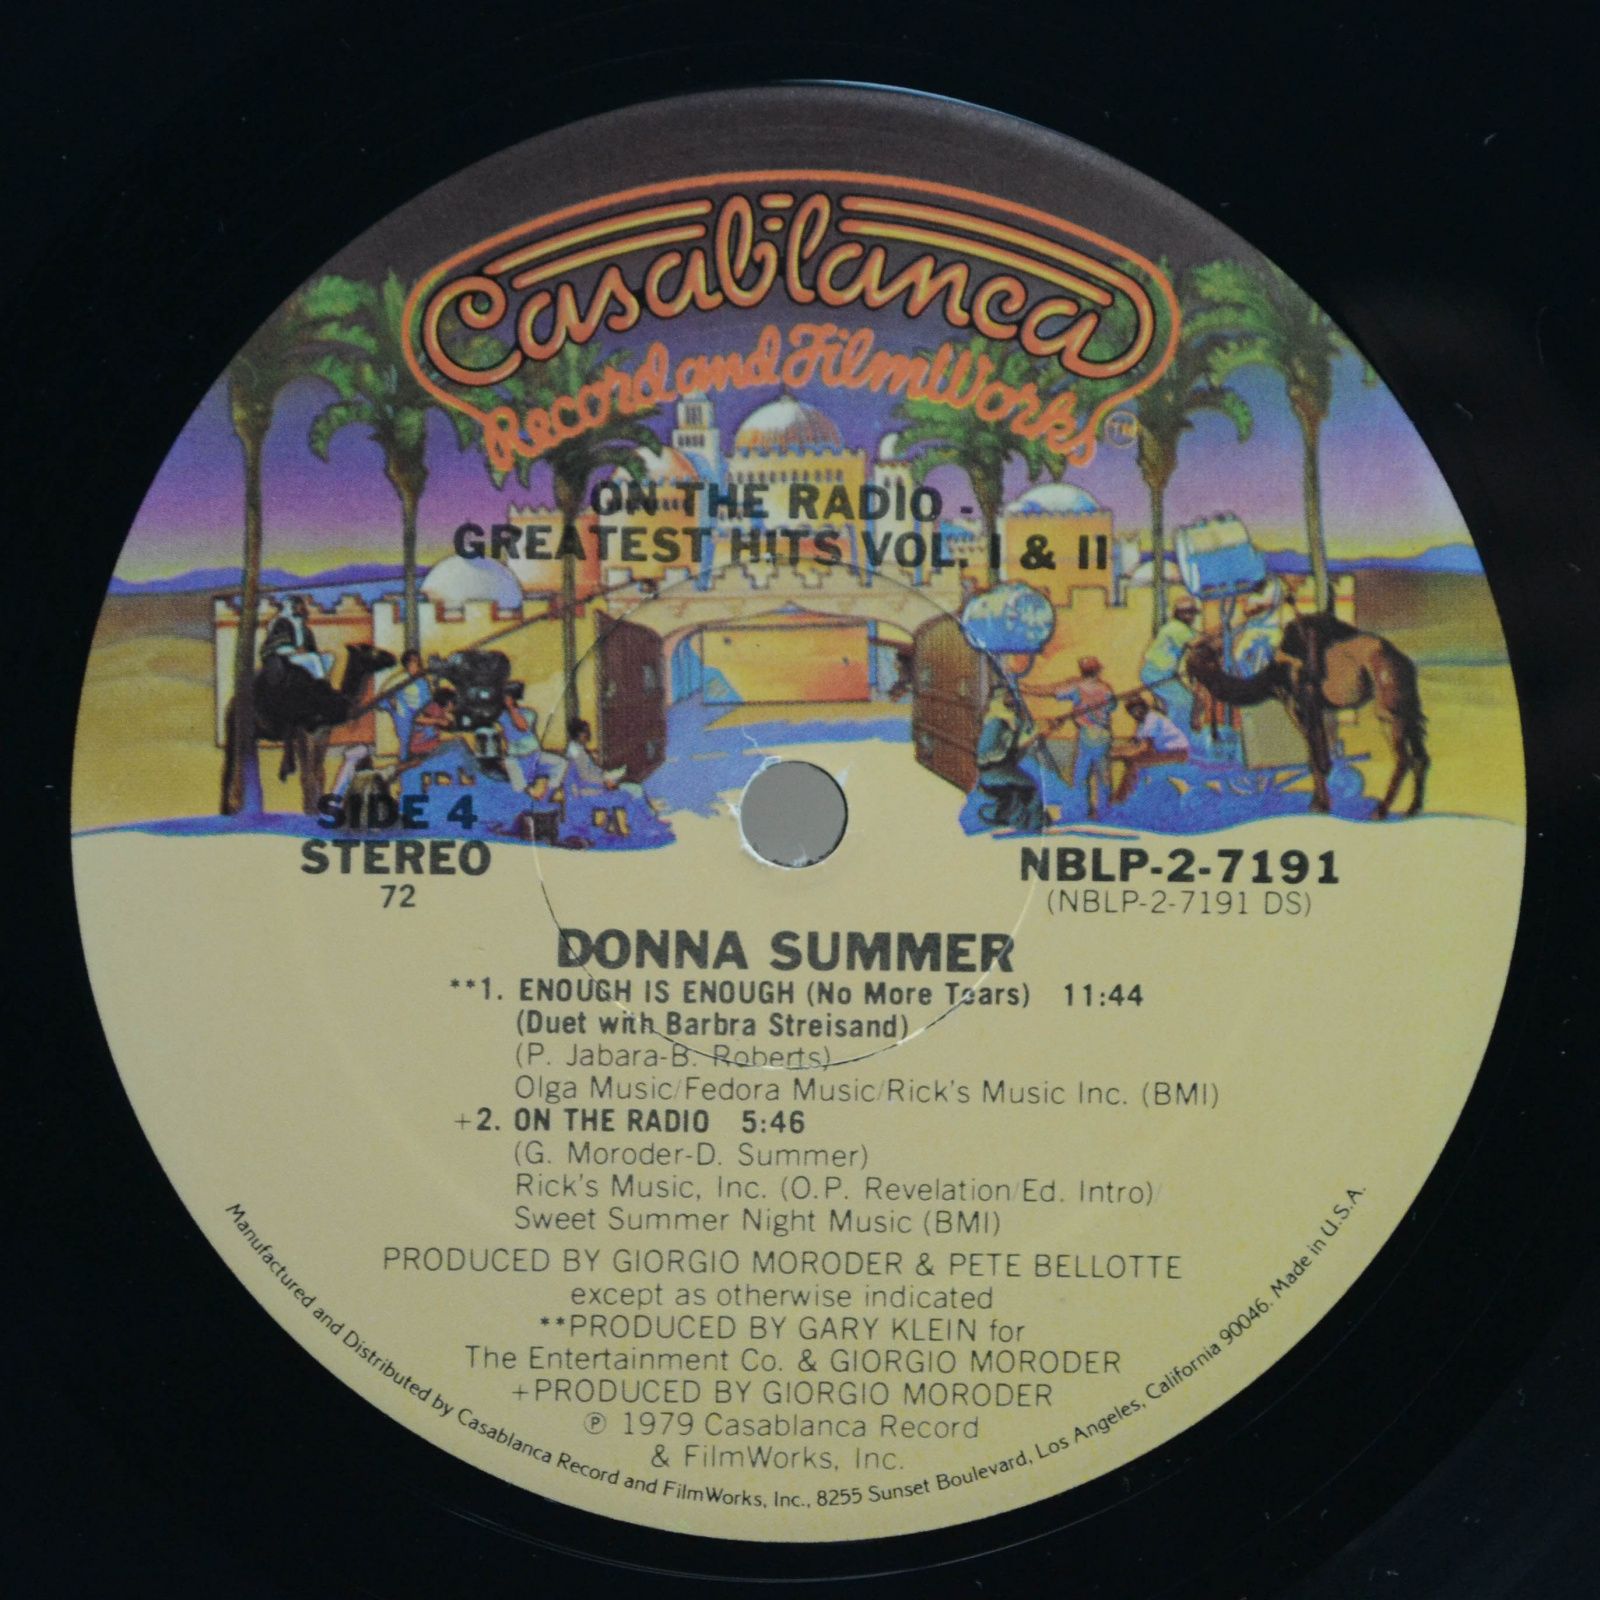 Donna Summer — On The Radio - Greatest Hits Volumes I & II (2LP, USA, poster), 1979